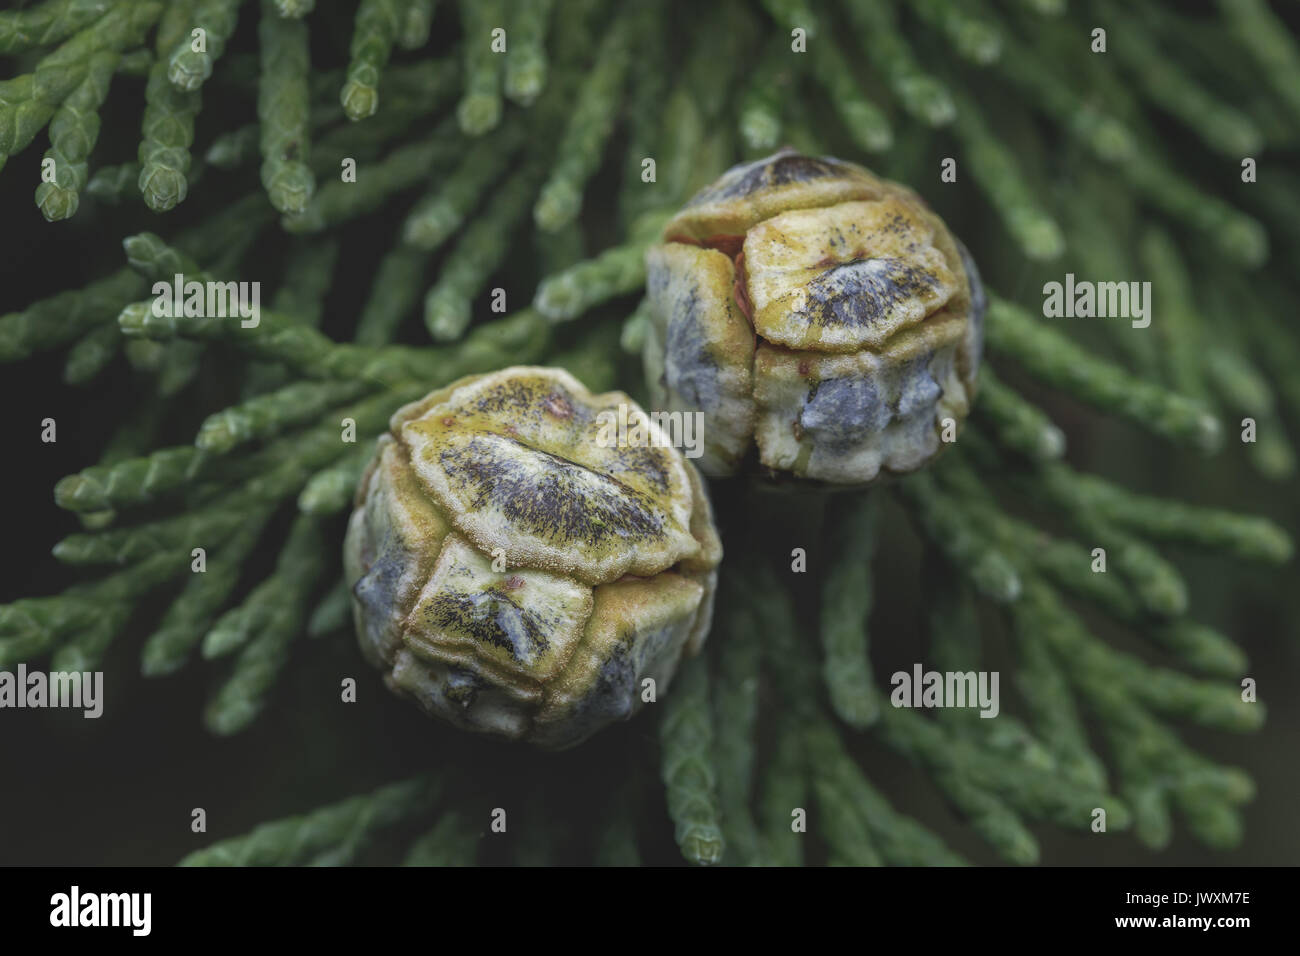 Macro photography of two your cones of a conifer tree chamaecyparis lawsoniana Stock Photo